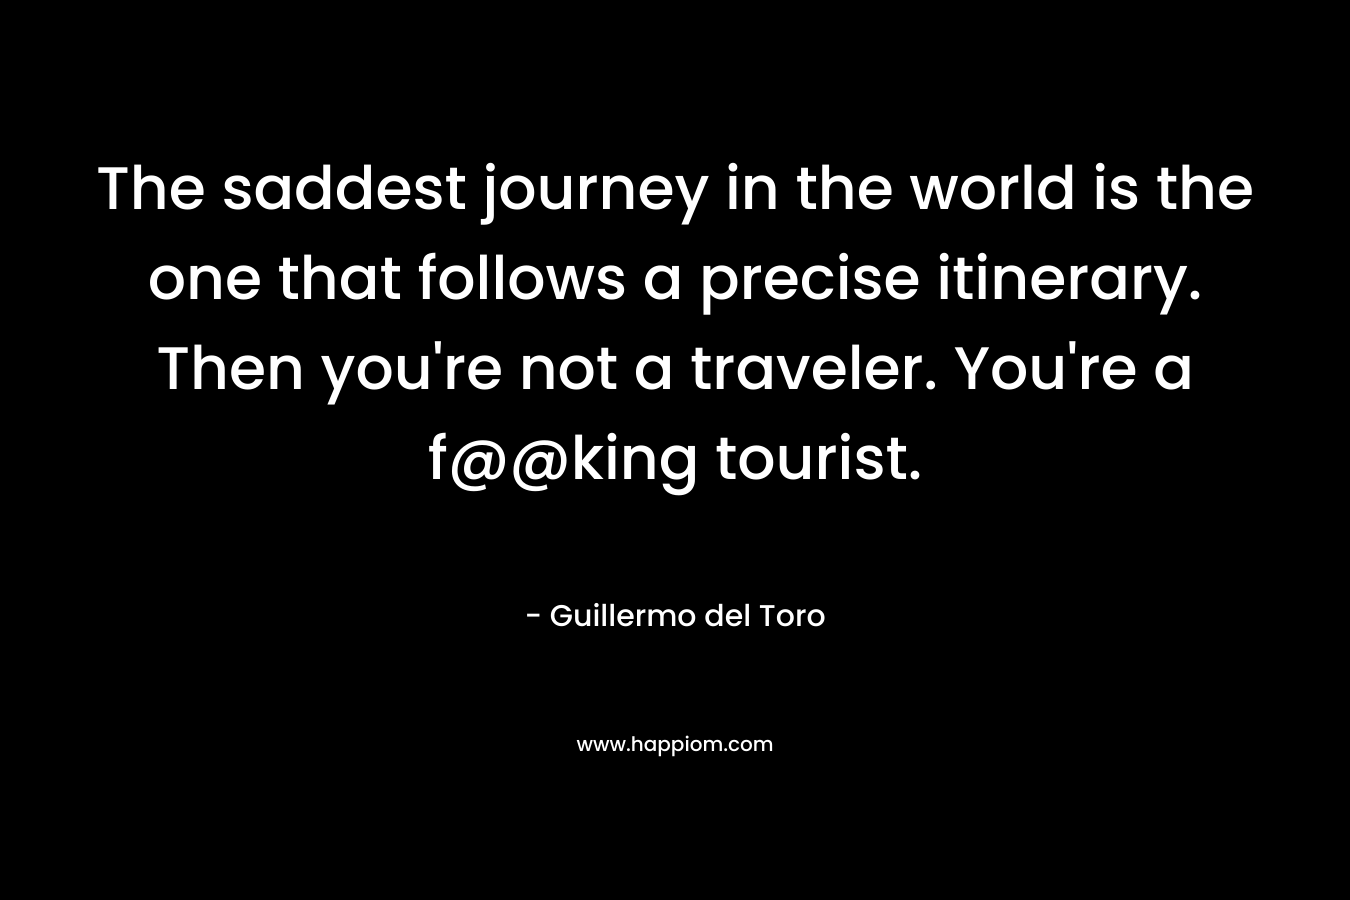 The saddest journey in the world is the one that follows a precise itinerary. Then you're not a traveler. You're a f@@king tourist.